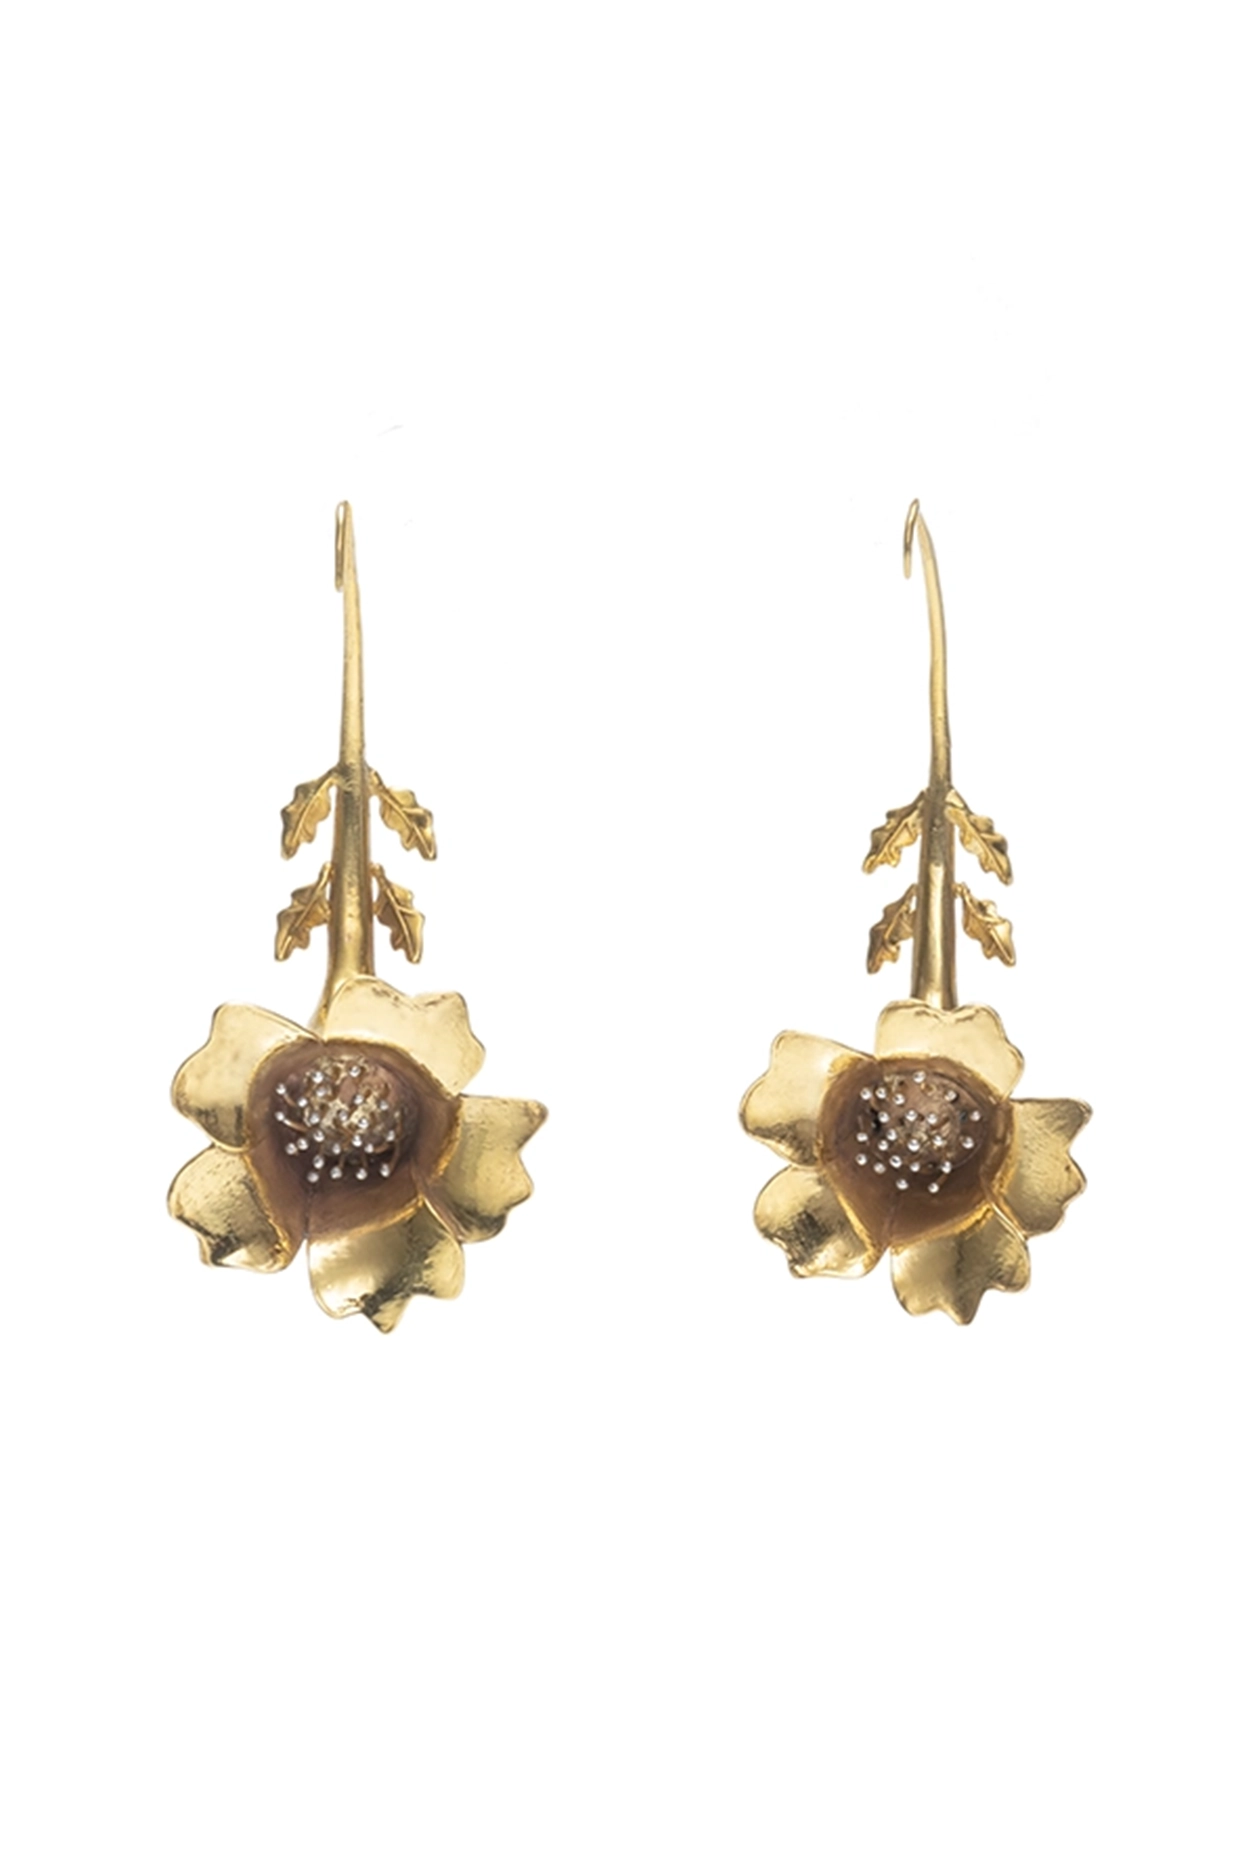 Gold Finish Floral Dangler Earrings by Ambar House